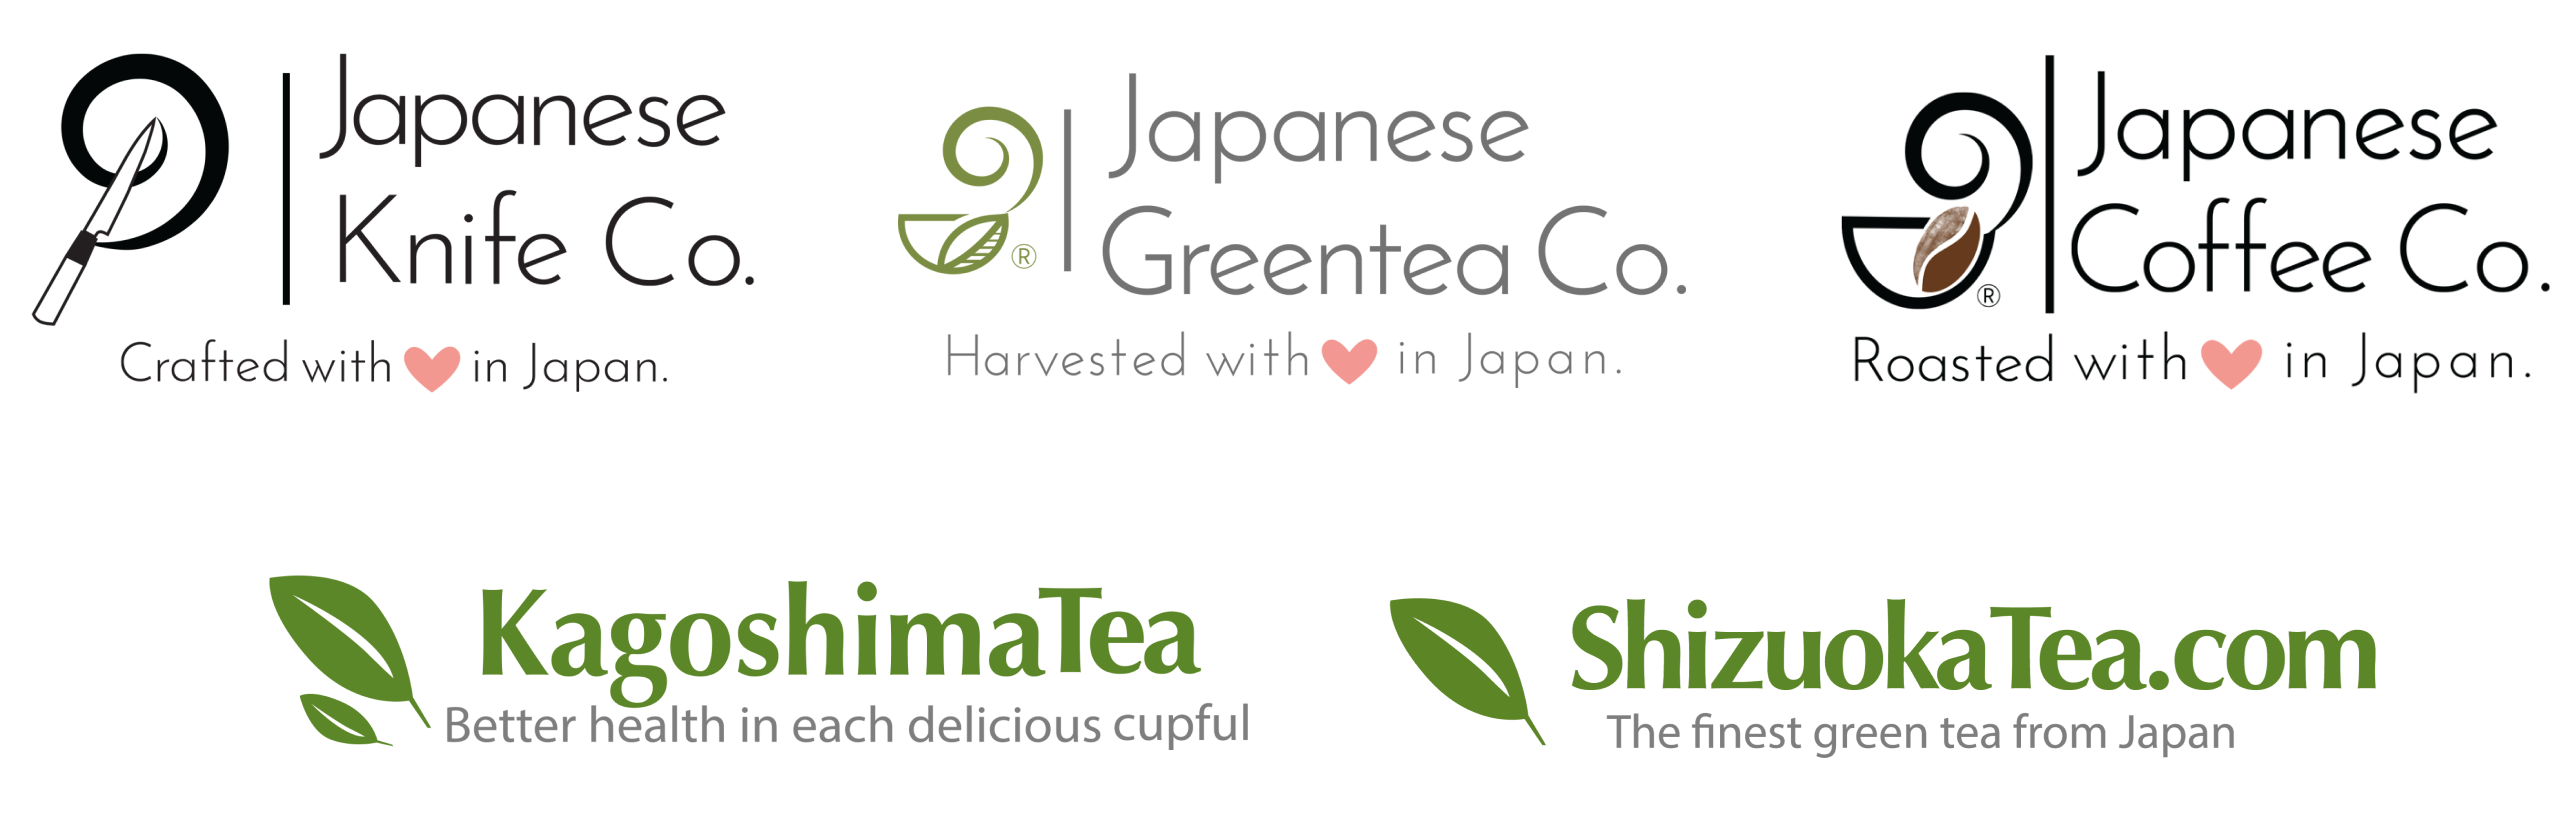 Matcha, Tea, Coffee, and Premium Japanese Products in One Place